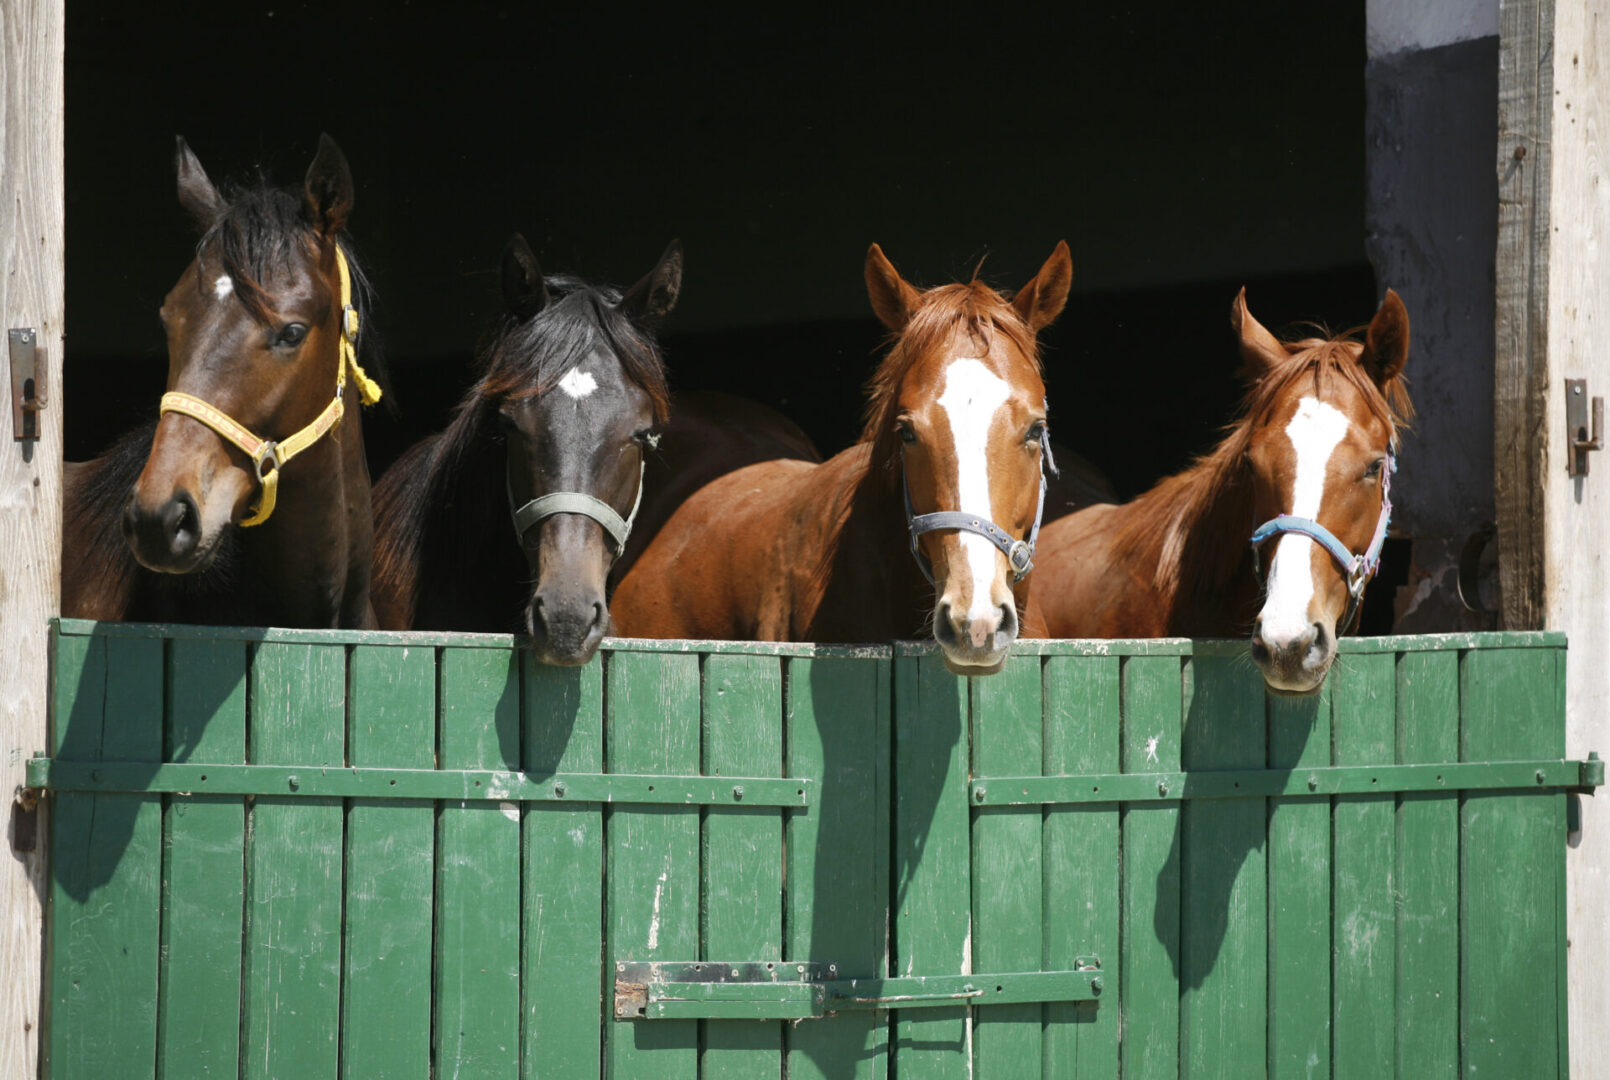 Nice thoroughbred foals in the stable door. Purebred chestnut racing horses in the barn.